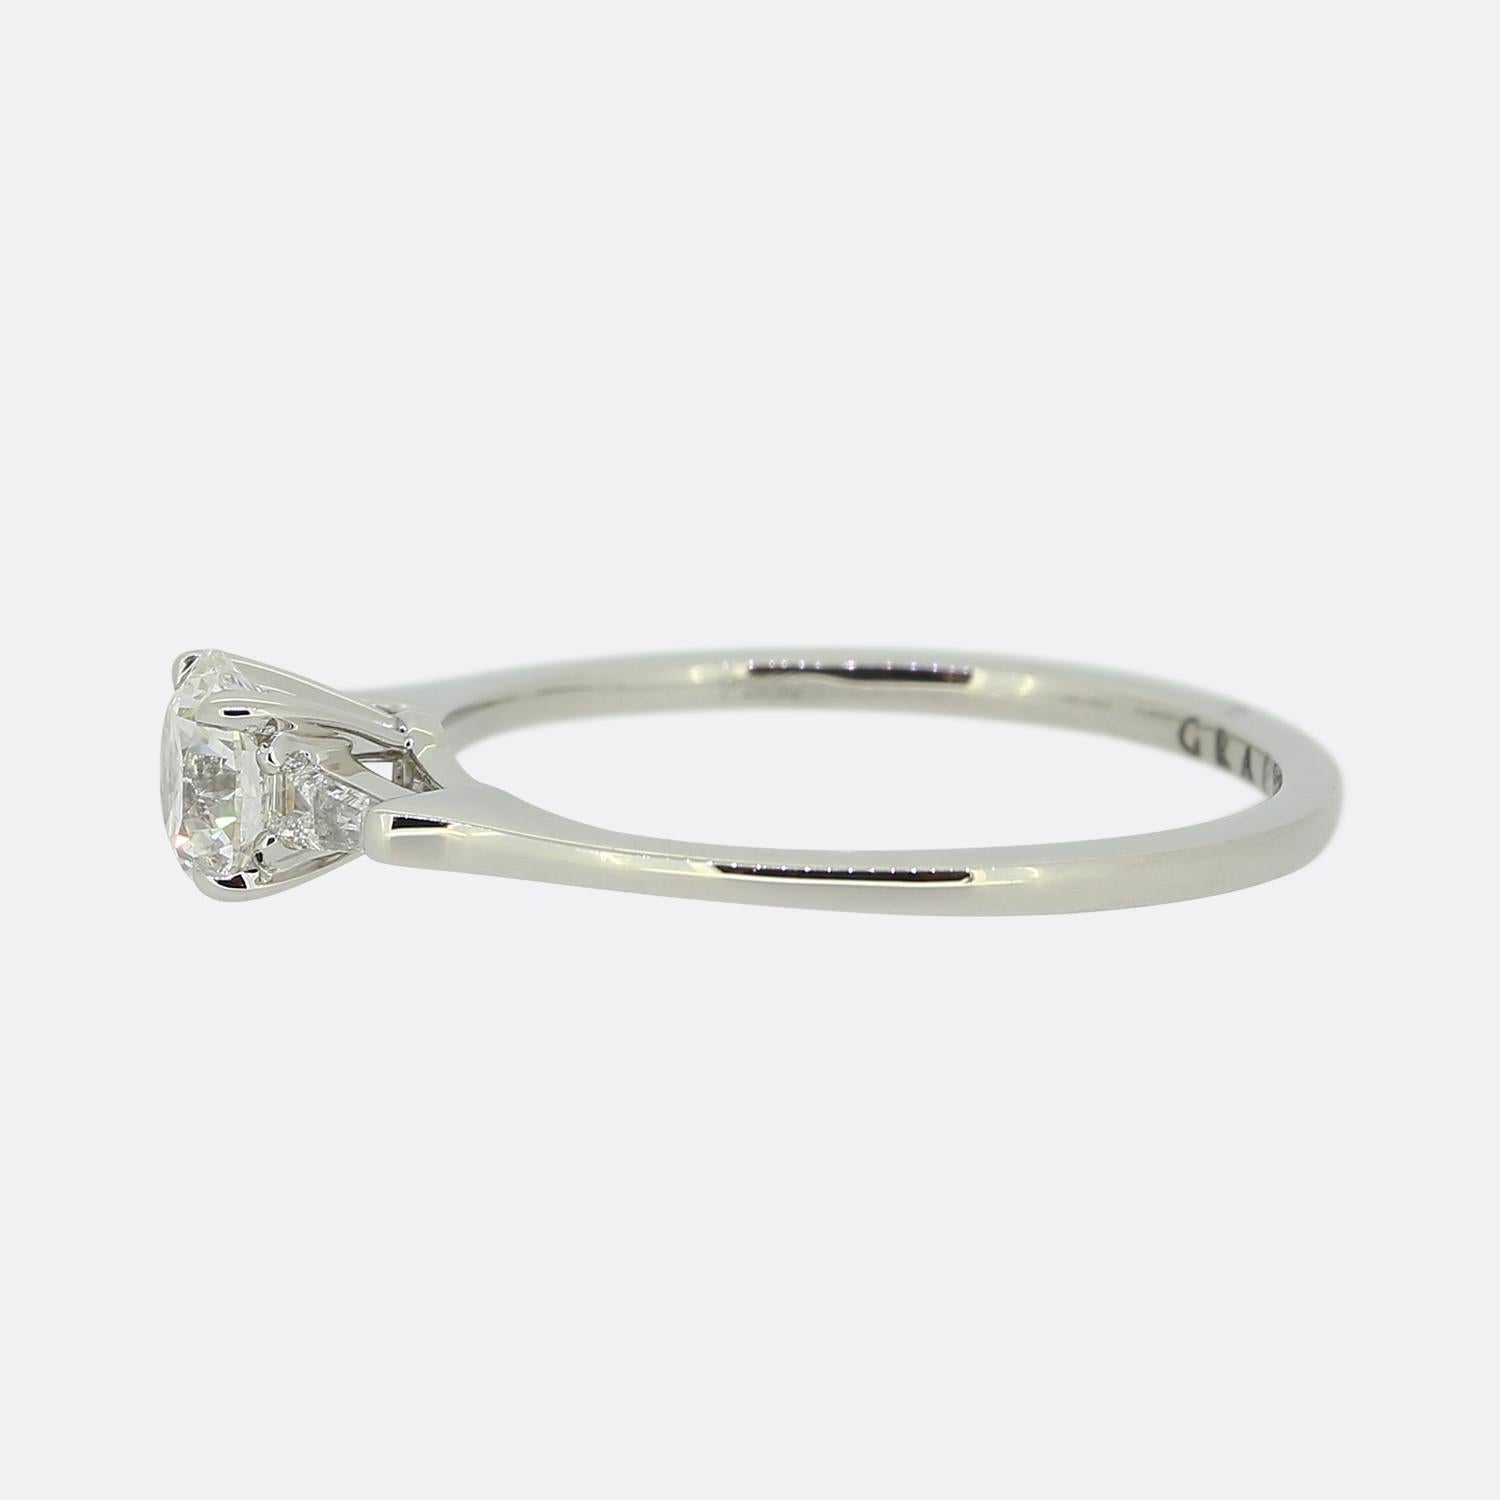 Here we have a fabulous diamond engagement ring from the luxury jewellery designer Graff. The ring features a single round brilliant cut diamond at the centre. This principal stone sits slightly risen and is flanked on either side by a single